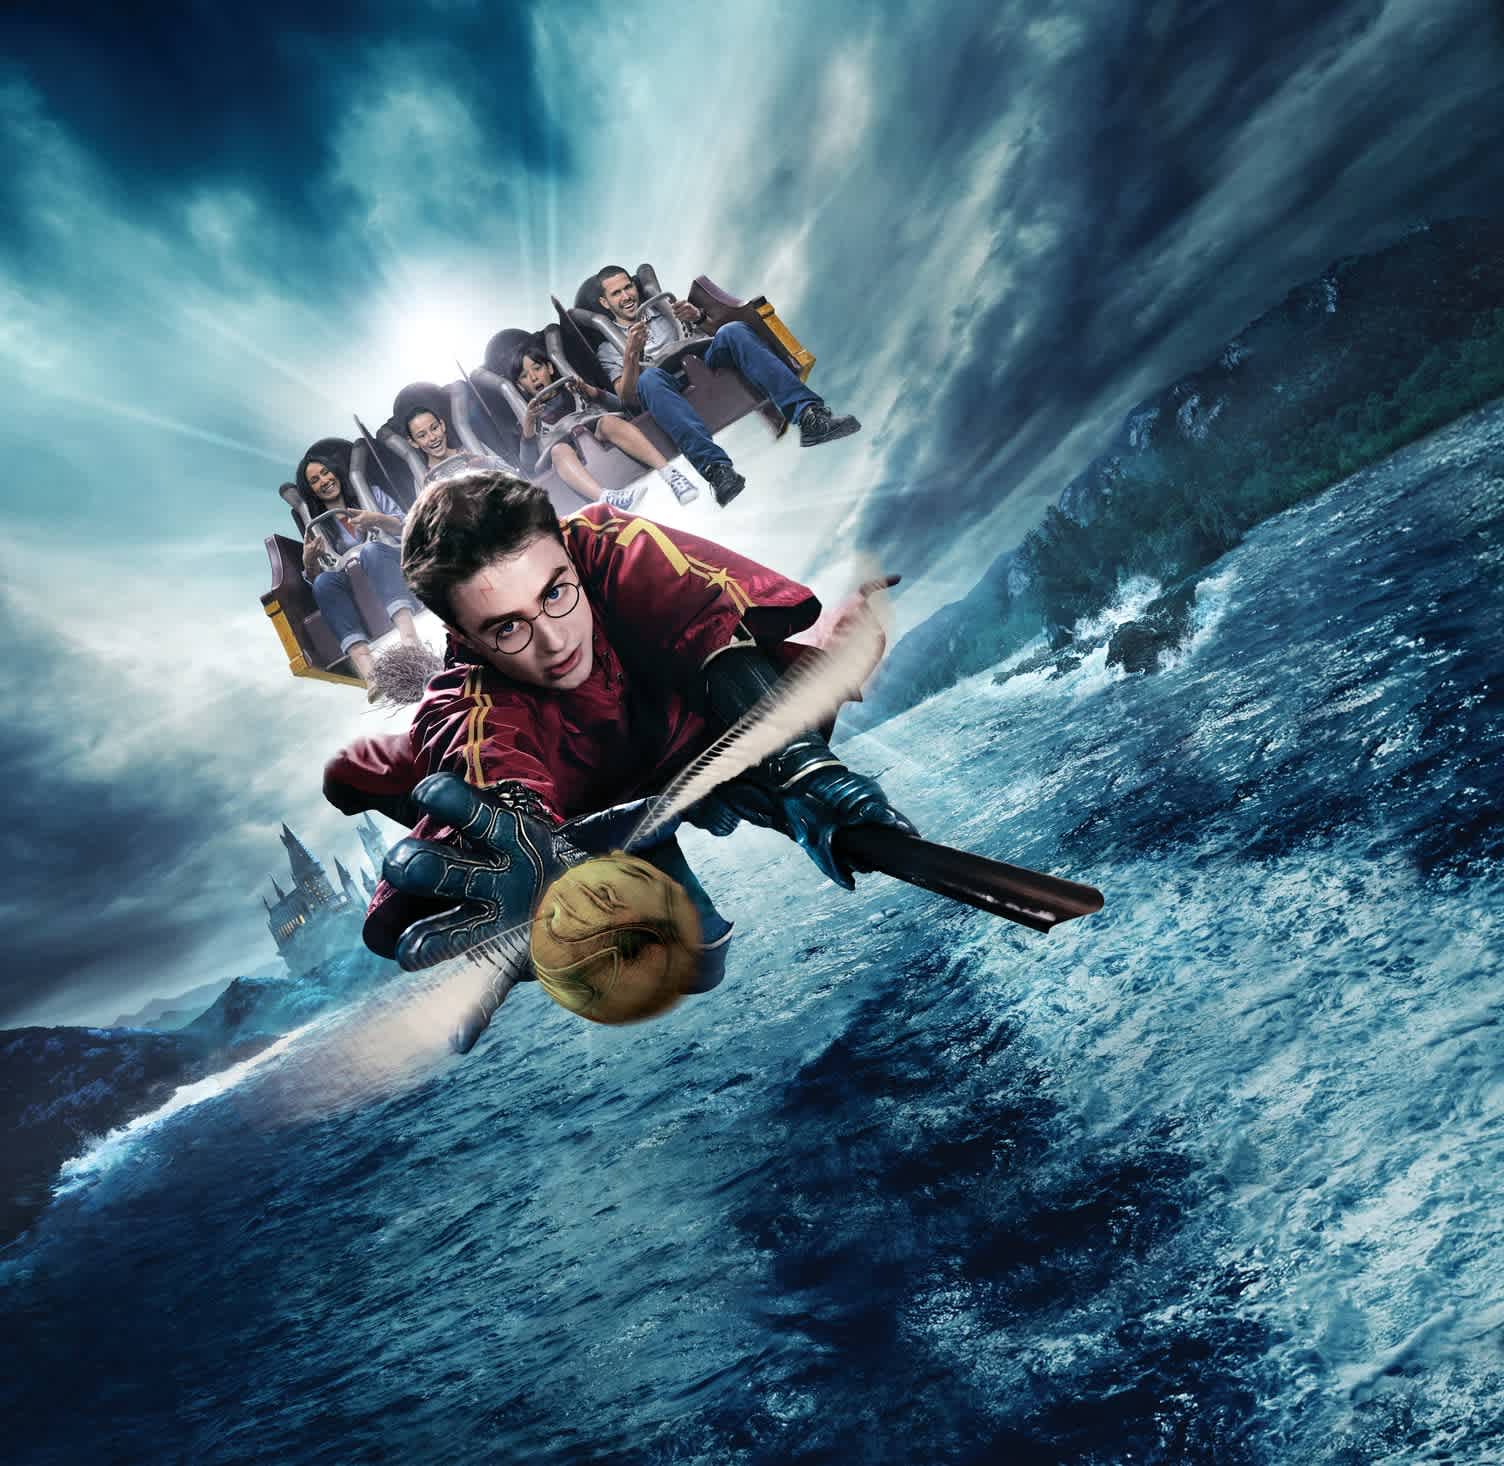 An exhilarating scene showcasing a young wizard riding a broomstick over a turbulent ocean. He's clad in a maroon and gold outfit, intently chasing a golden ball. Behind him, other ride-goers are enjoying an amusement park attraction, all against a dramatic backdrop featuring a stormy sky and a distant castle.